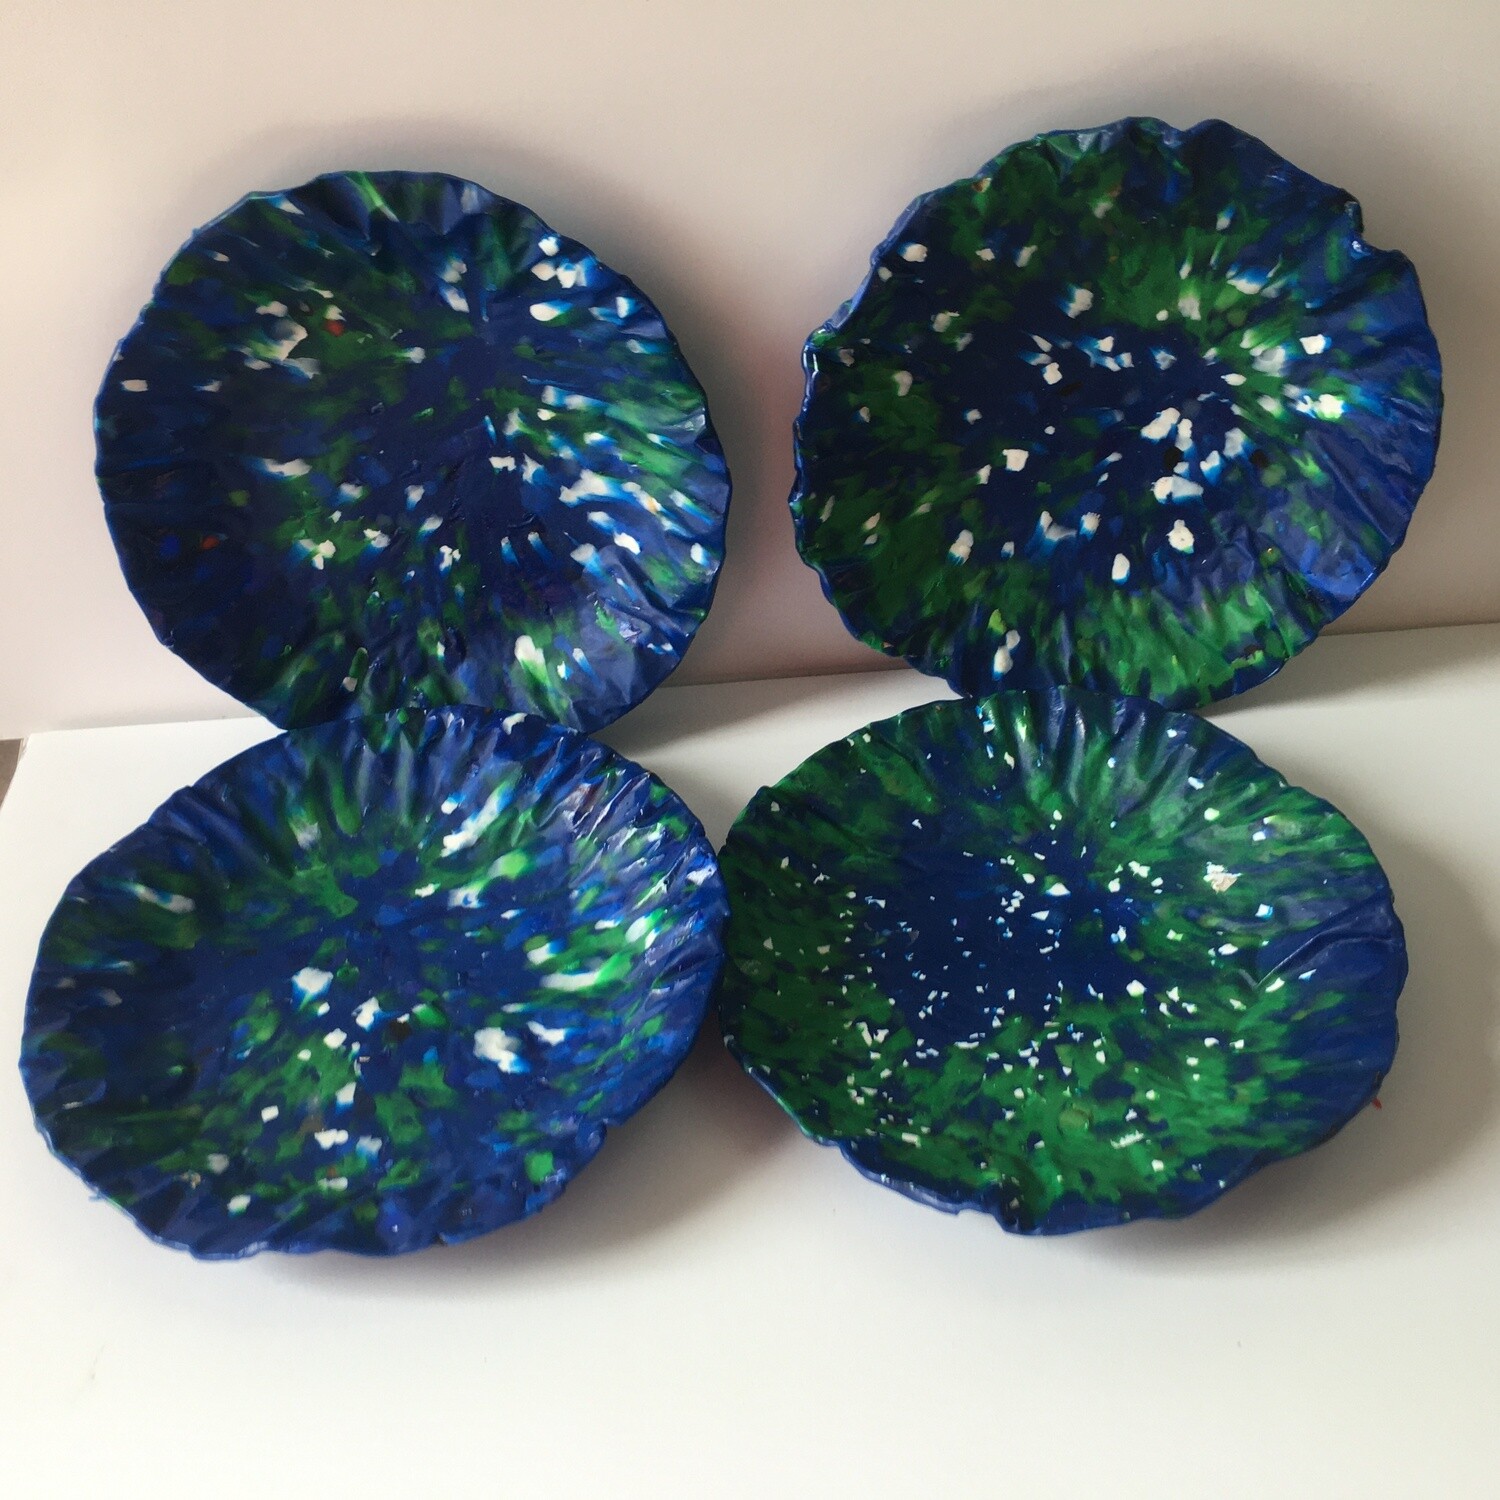 JFP Small Blue Speckled Plate Set, 4 Plates